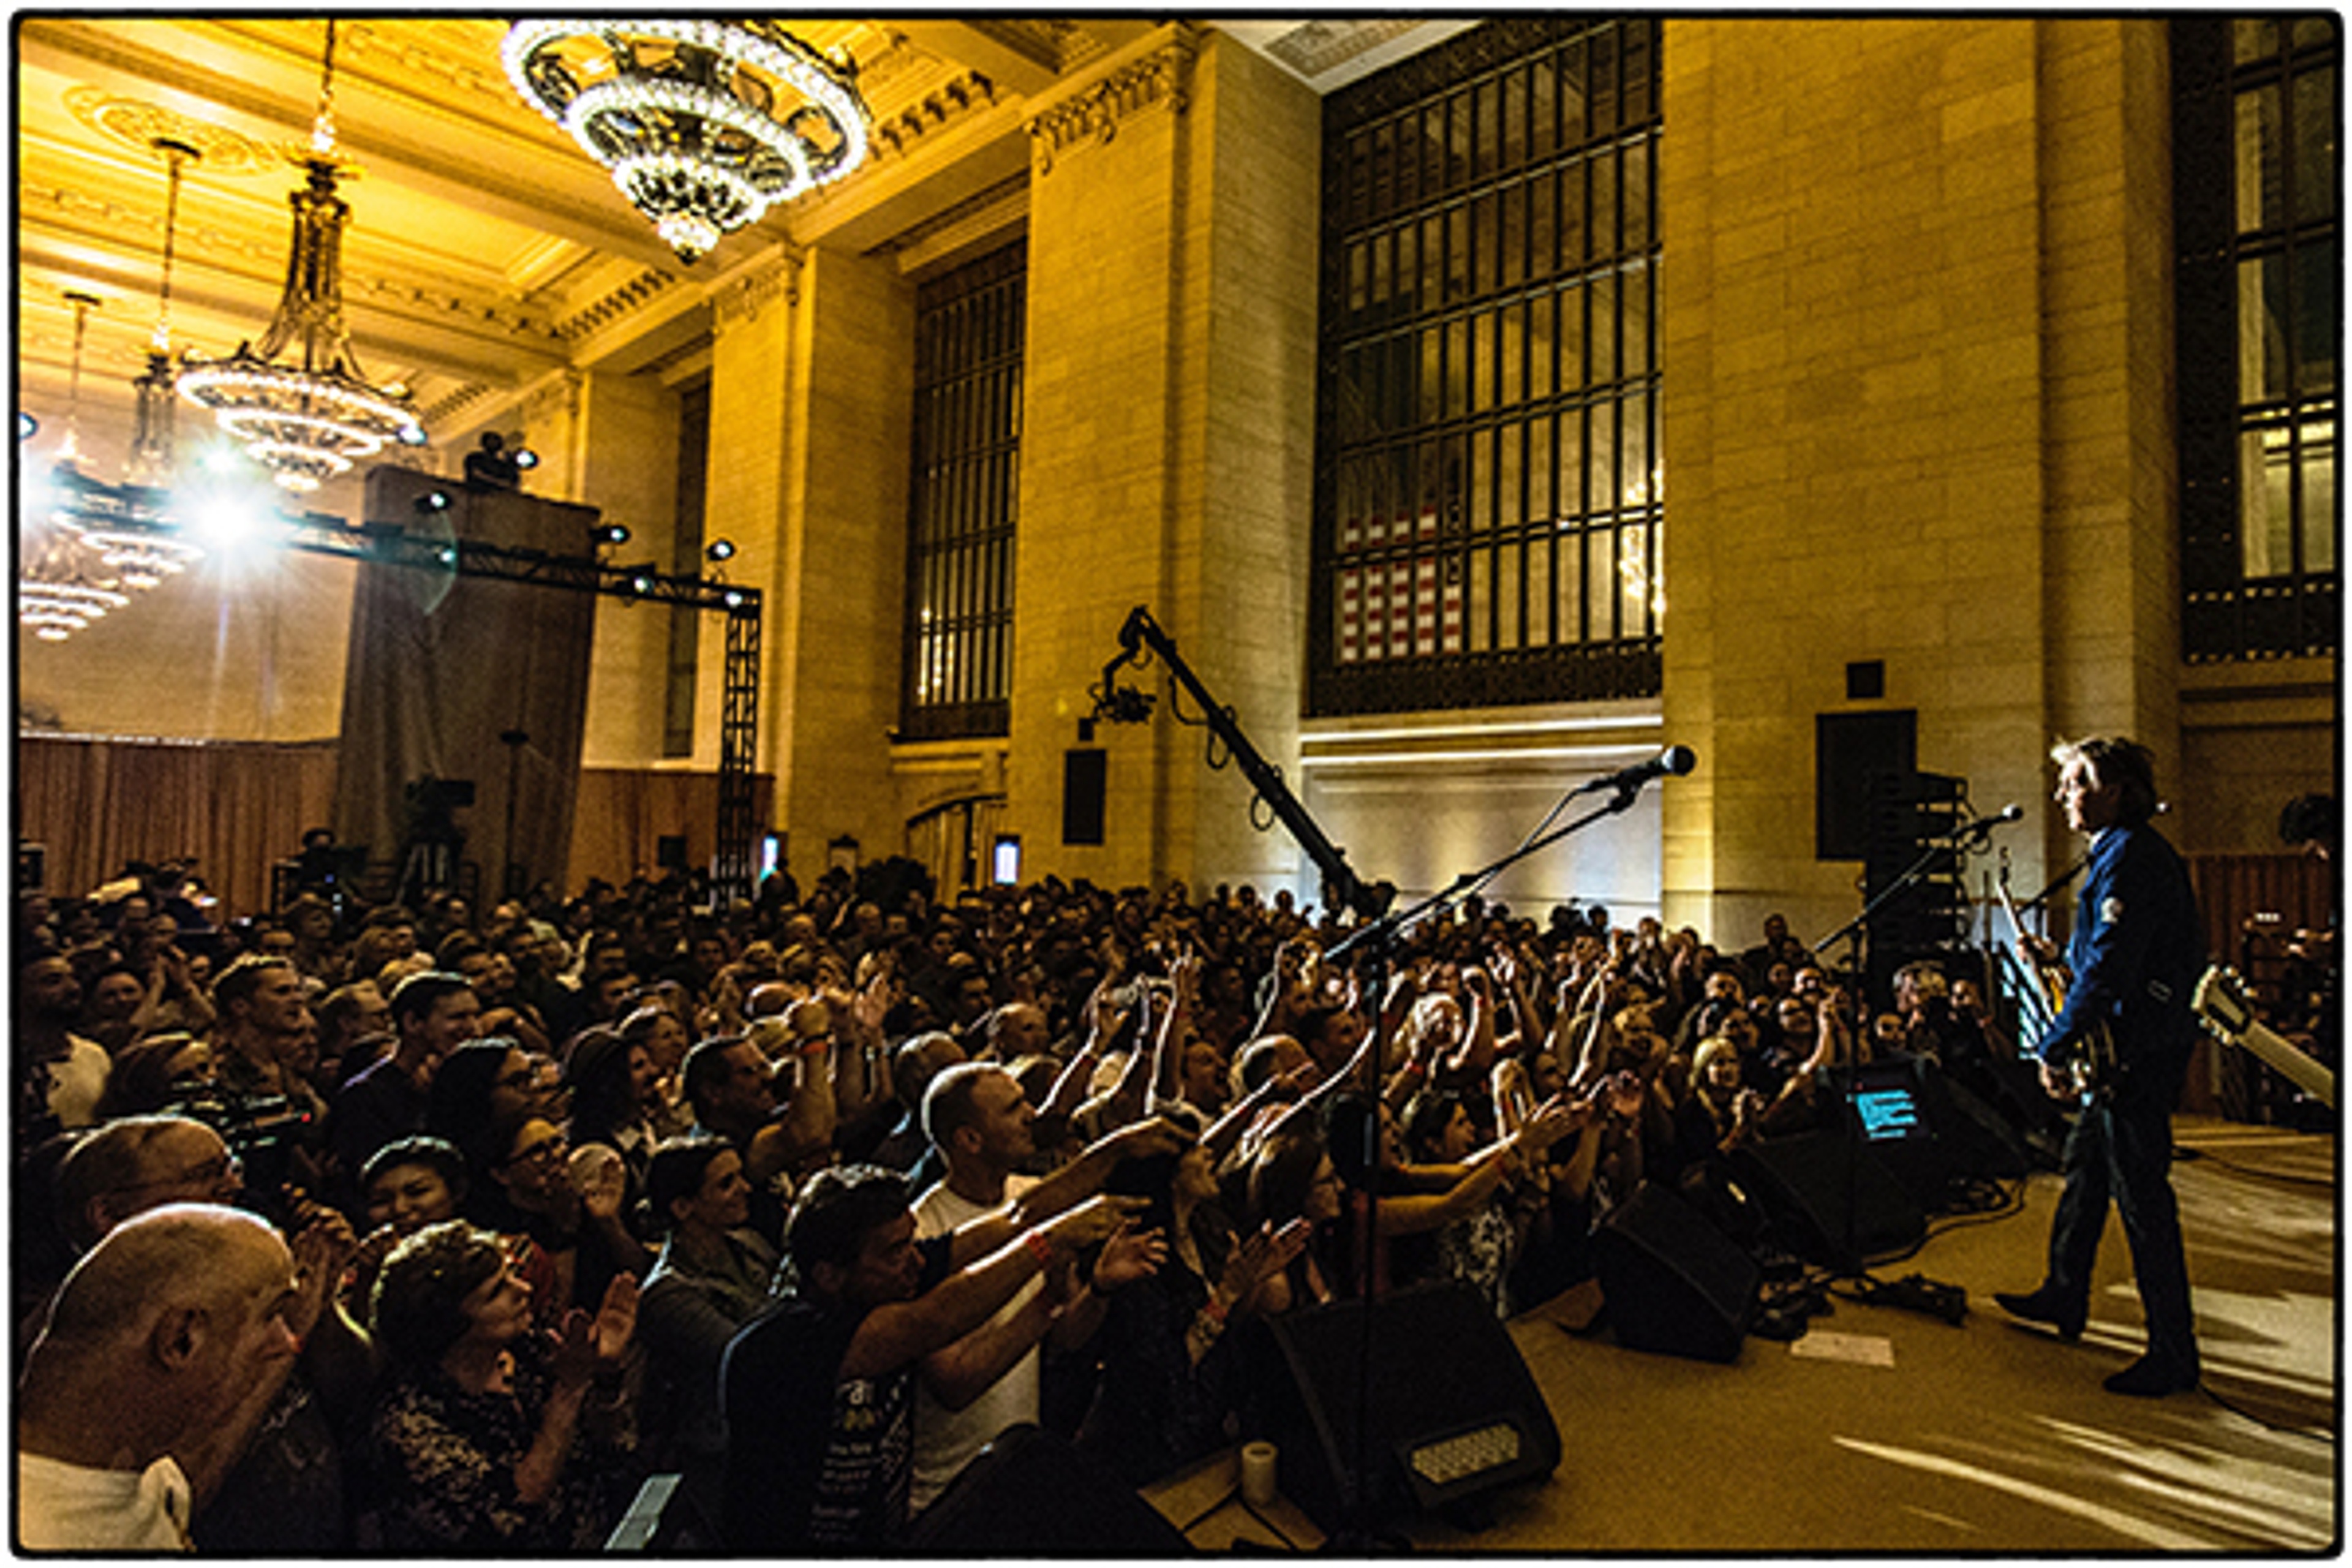 Watch: Paul live at Grand Central Station, New York